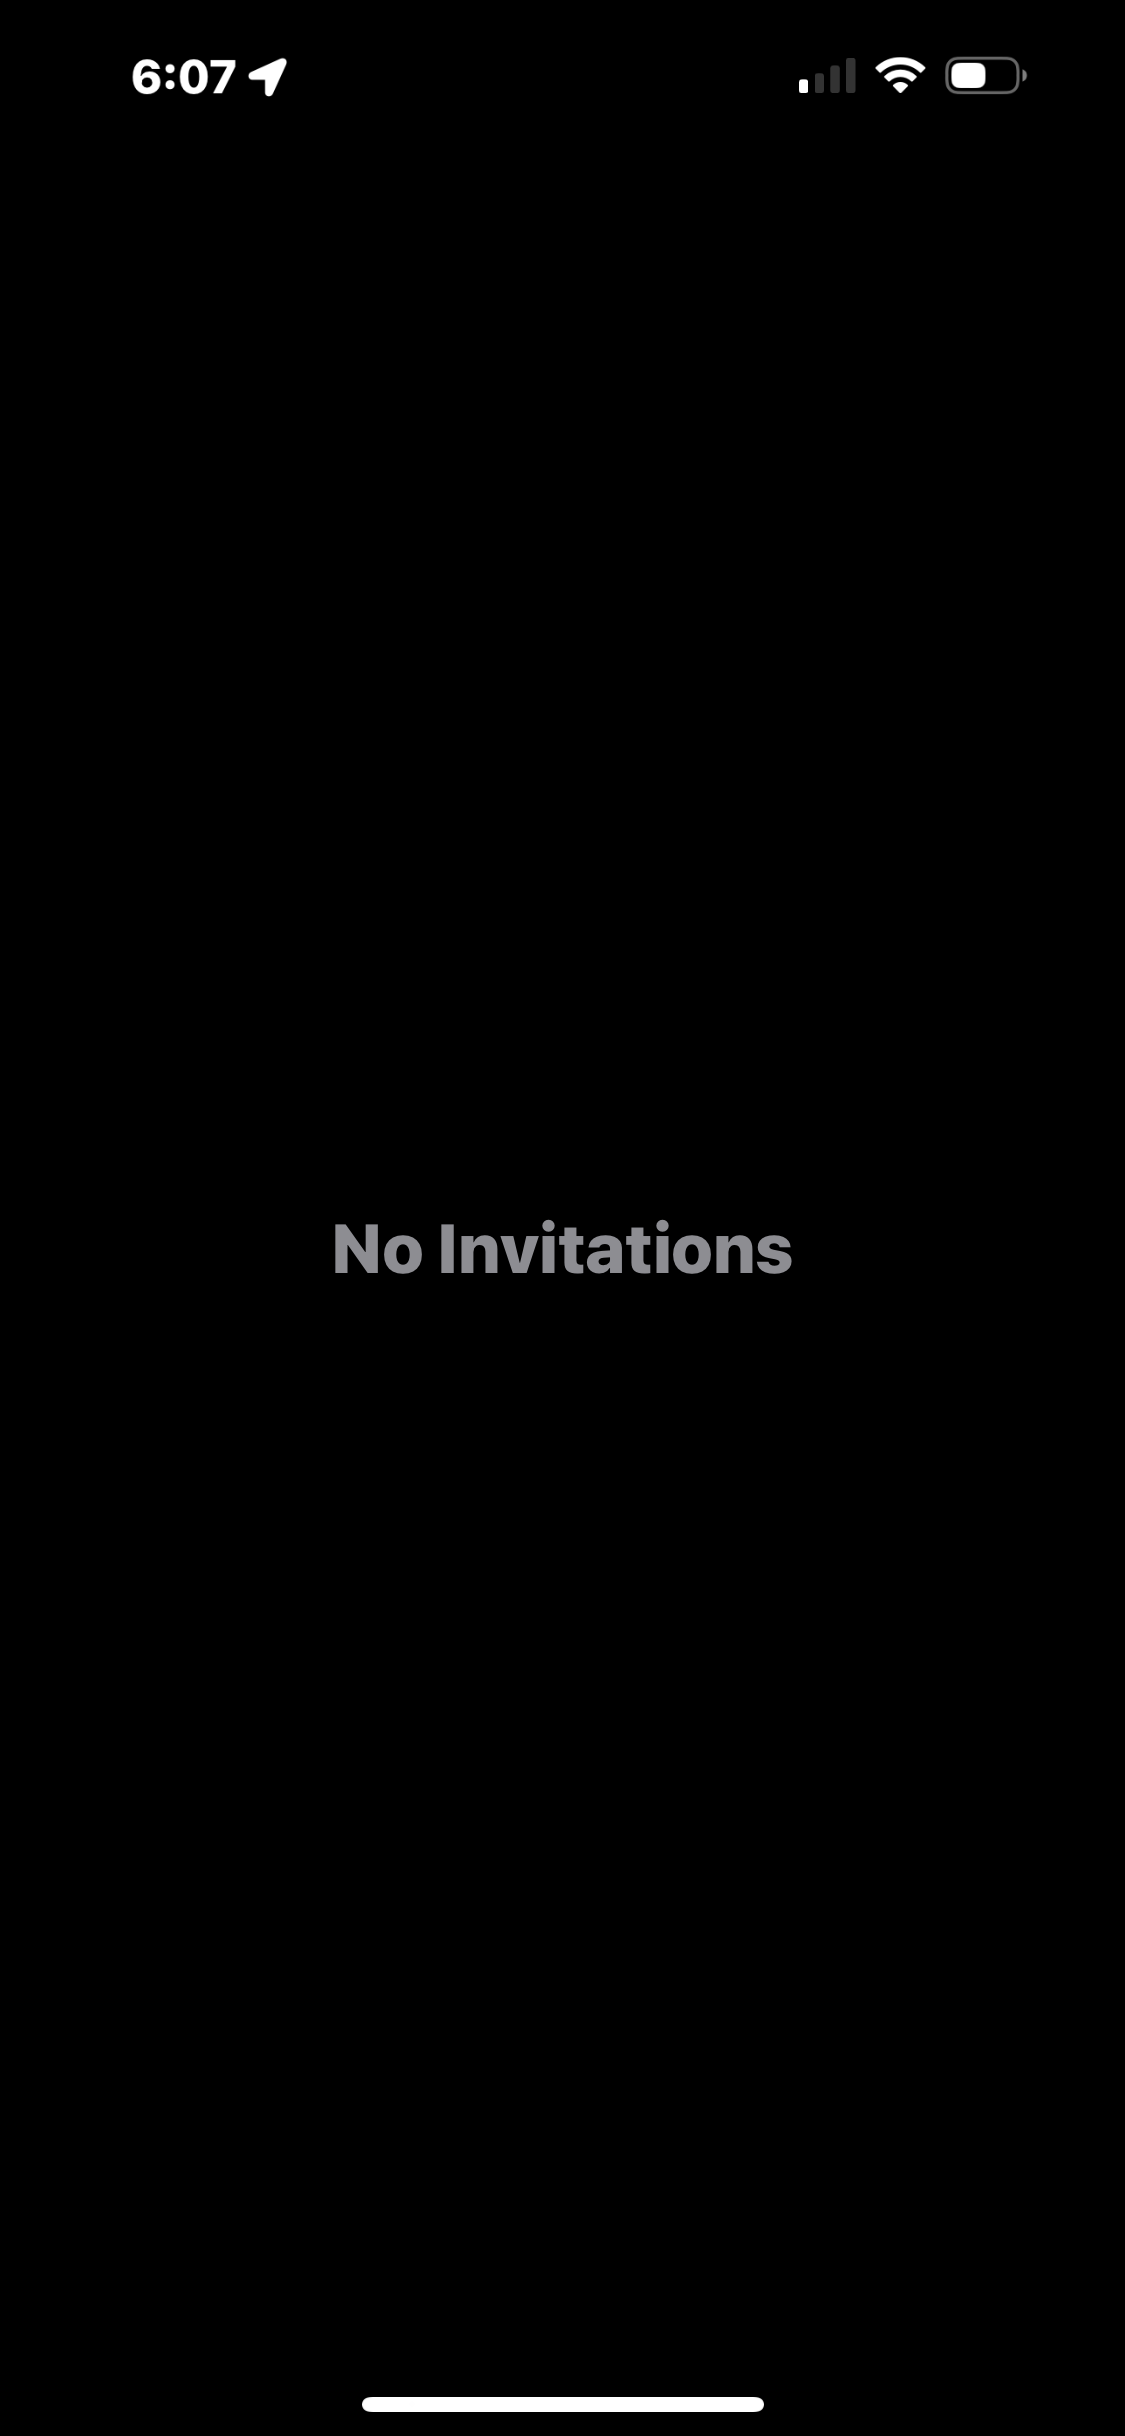 Calendar shows only “No invitations” Apple Community